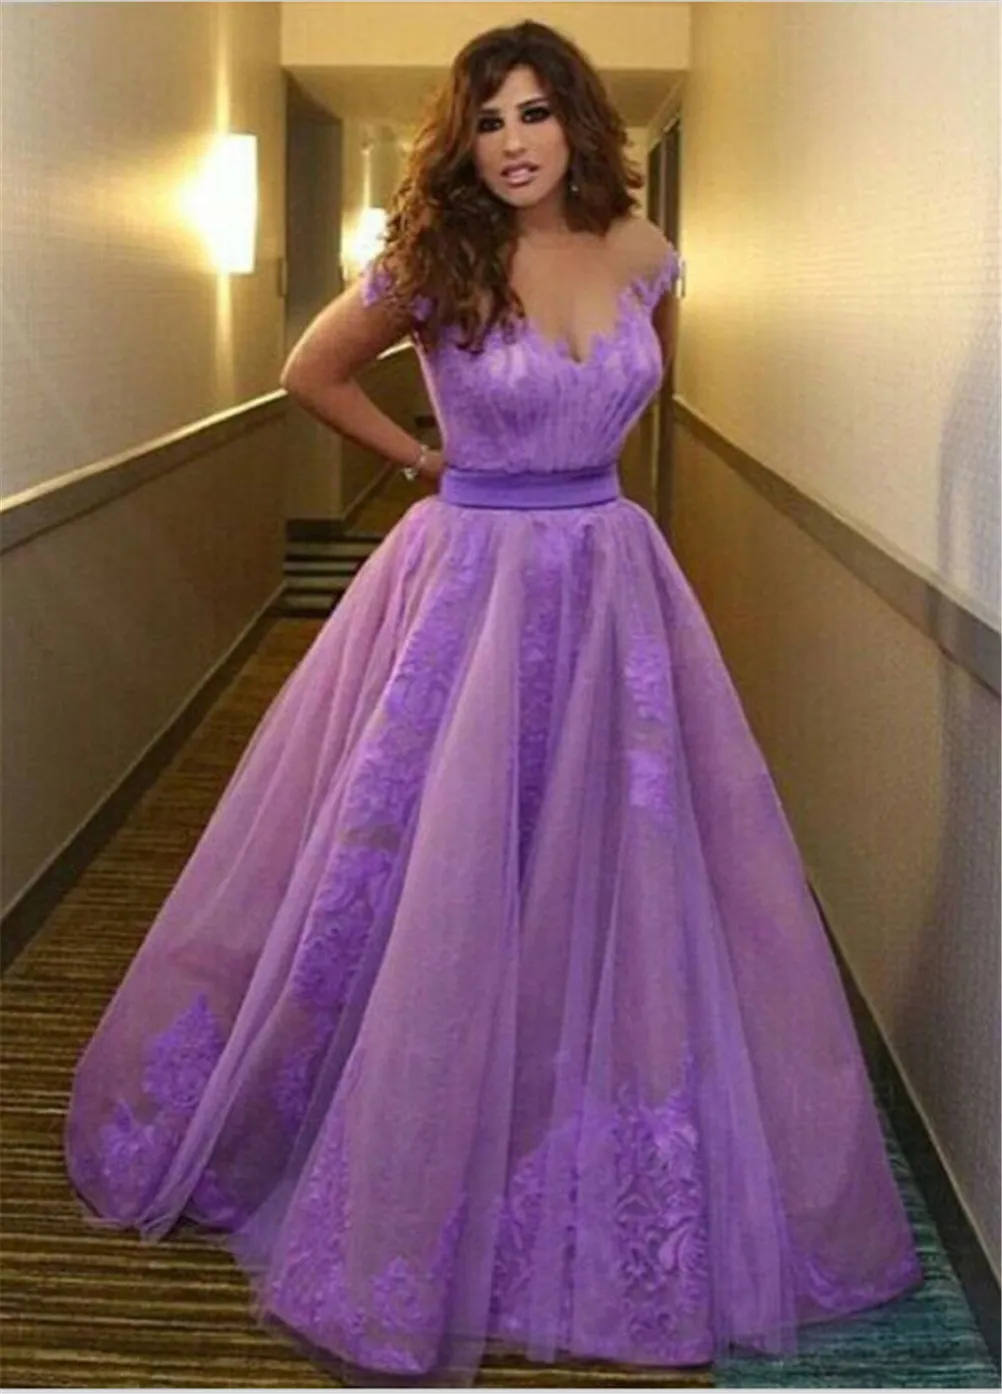 Delicate Off-the-shoulder Tulle Princess Prom Dress With Appliques Lilac Evening Gowns vestido longo azul New Fashion